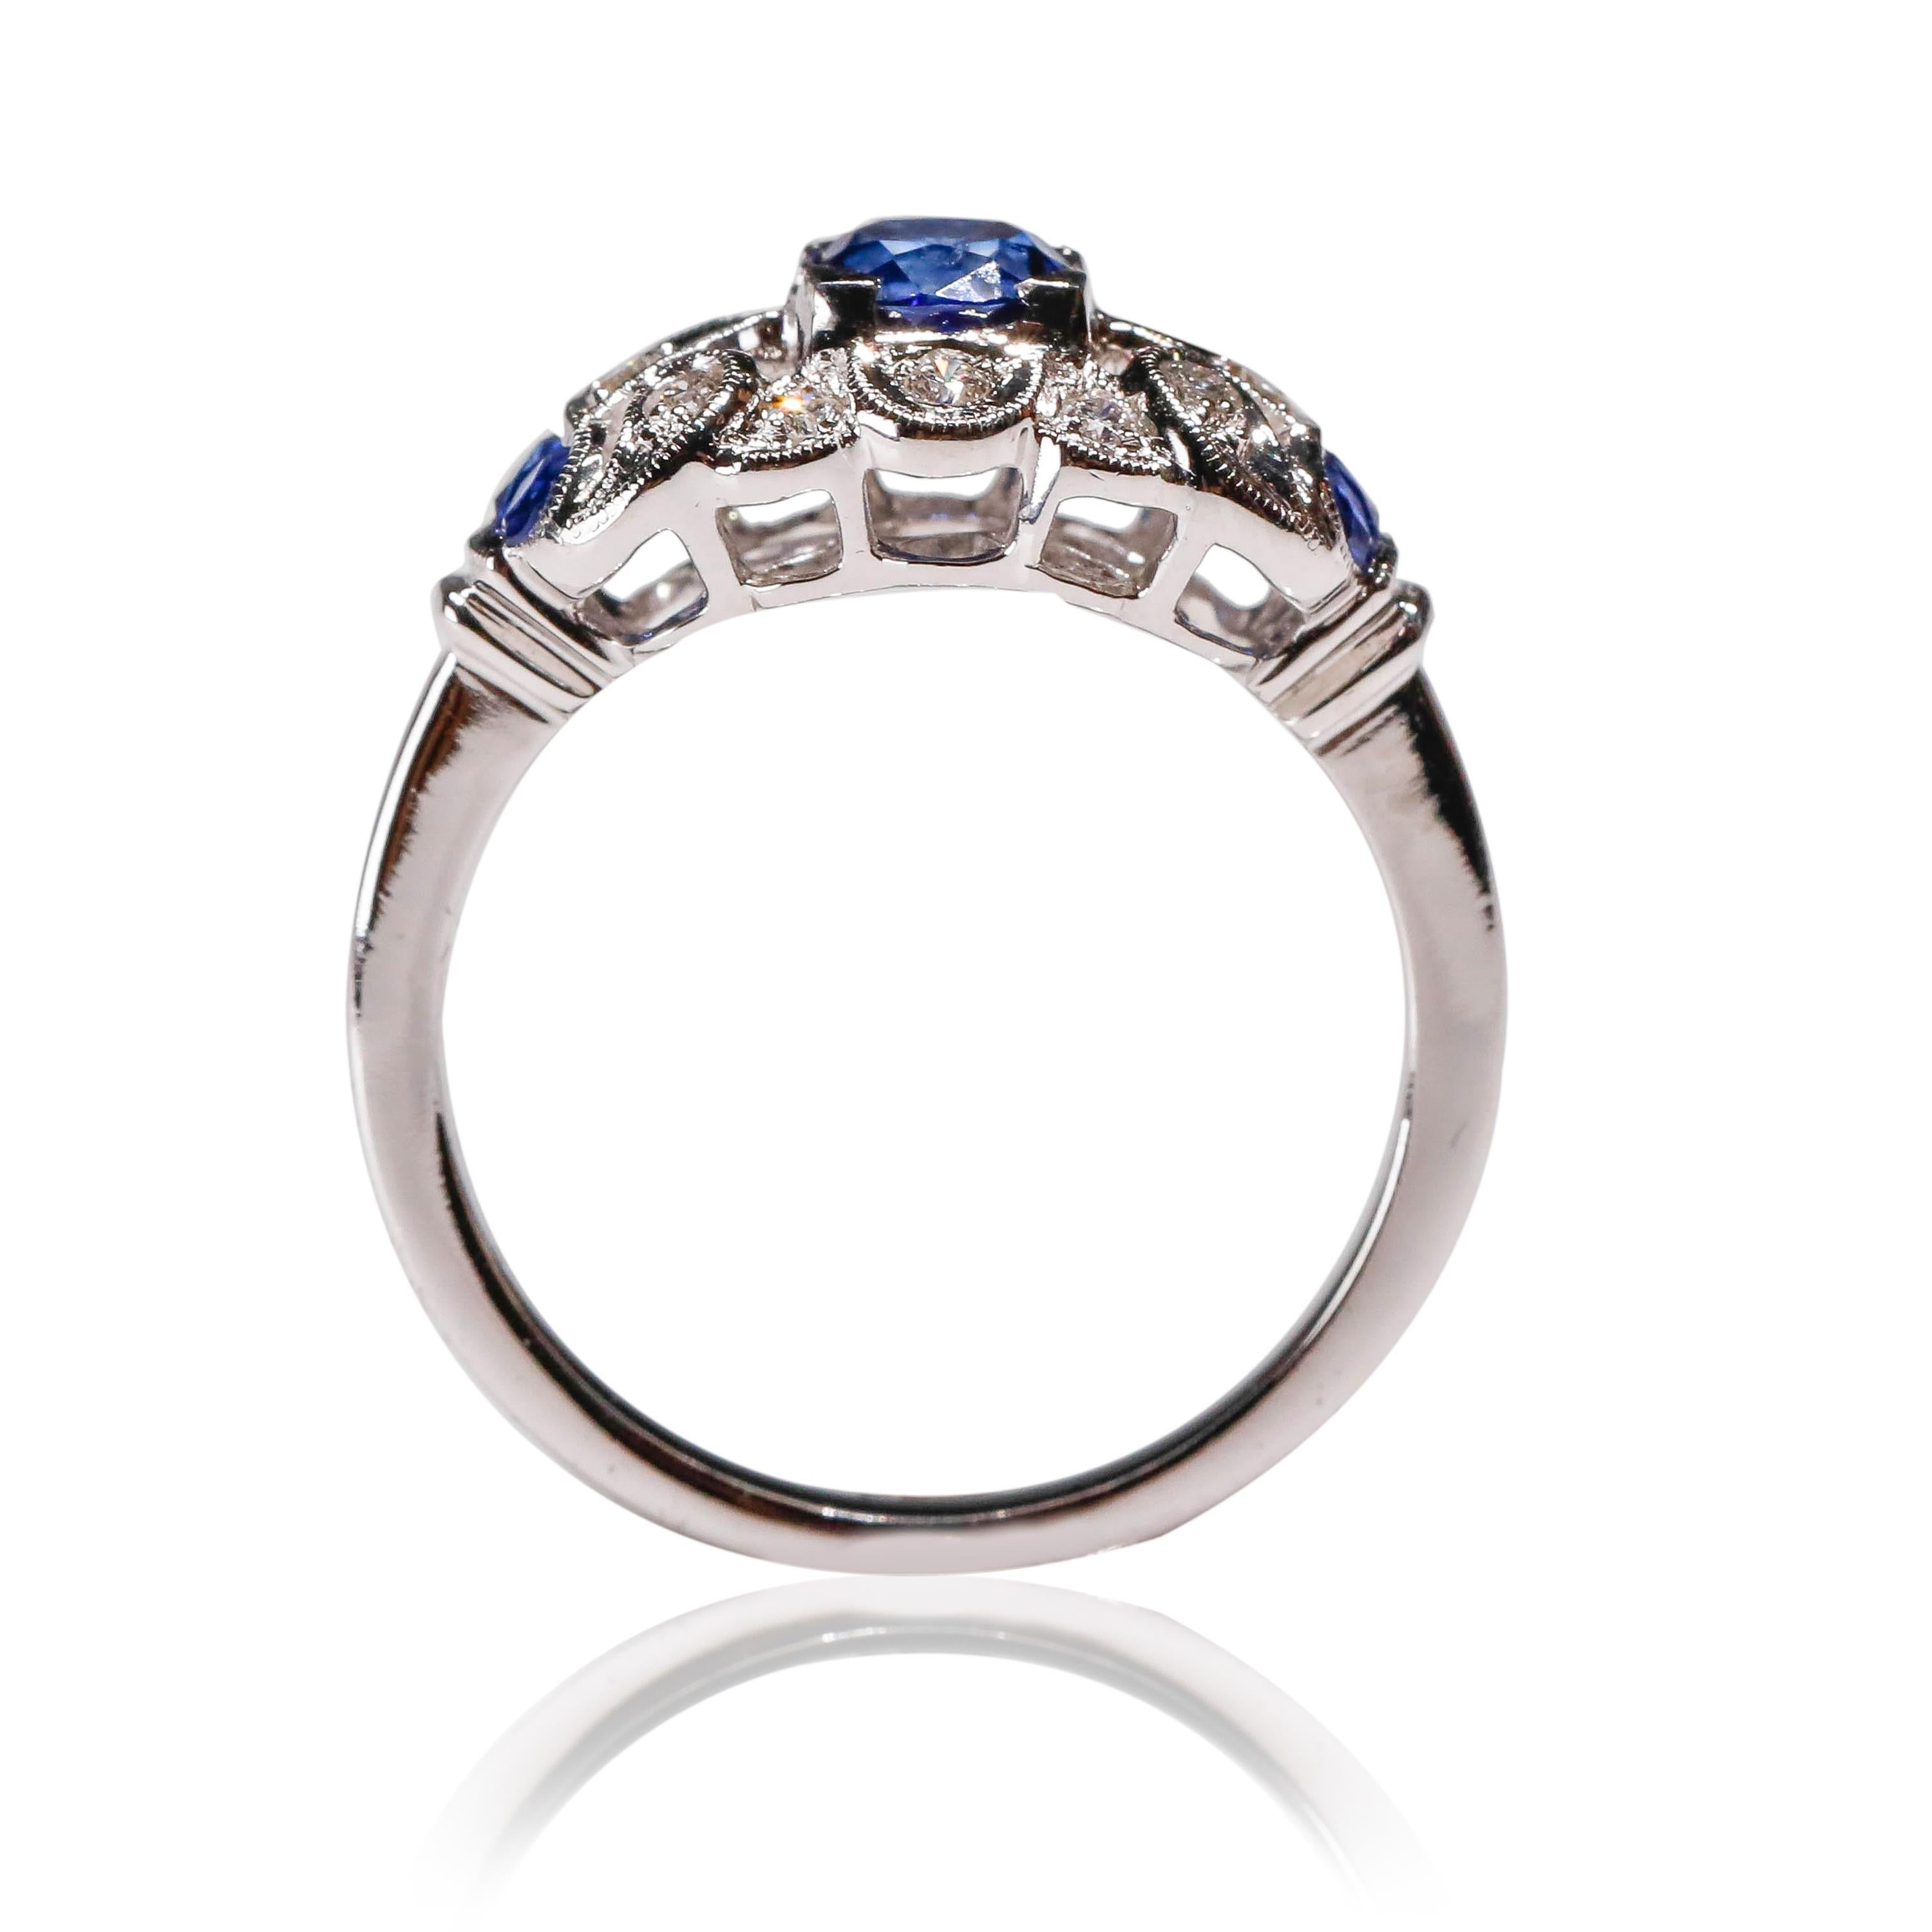 18 Karat White Gold 0.93 Ct Art Deco Style Blue Sapphire Diamond Halo Ring

Crafted in 18 kt White Gold, this Unique design showcases a Blue Sapphire 0.93 TCW Oval shaped Sapphire, set in a halo of round-cut mesmerizing diamonds, Polished to a